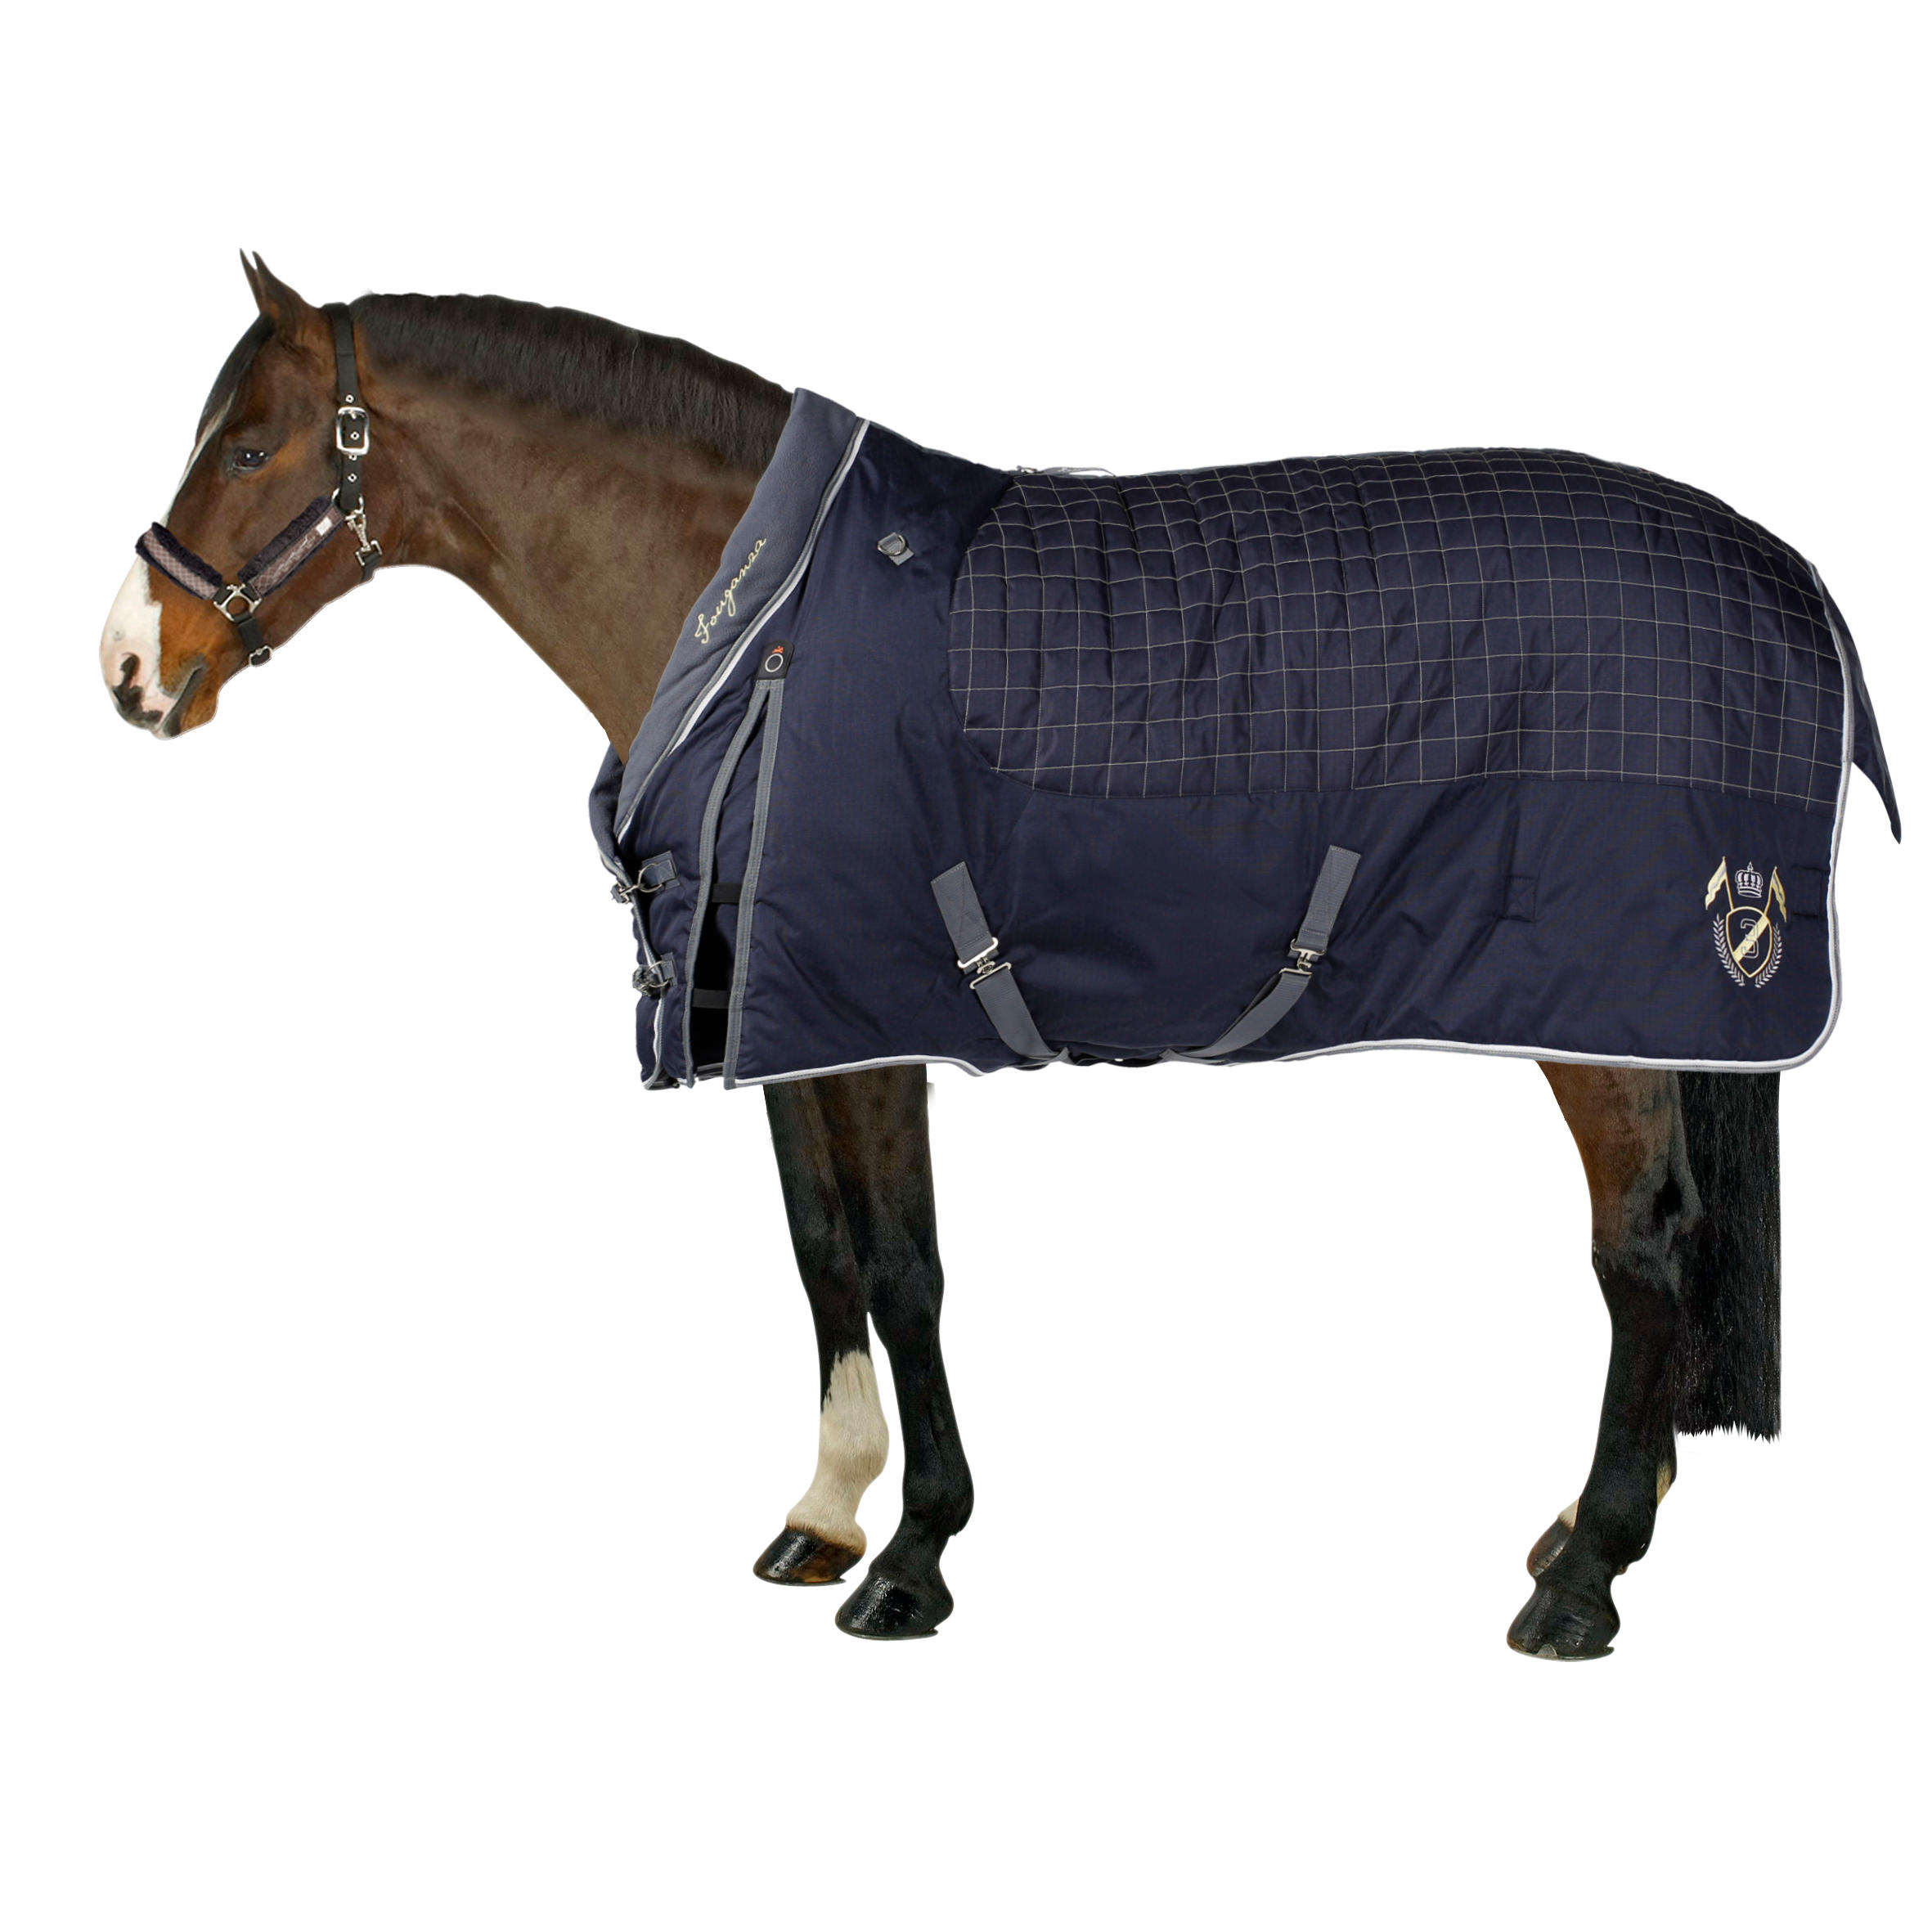 FOUGANZA STABLE 400 "3" horse riding stable rug for horse or pony - blue/grey